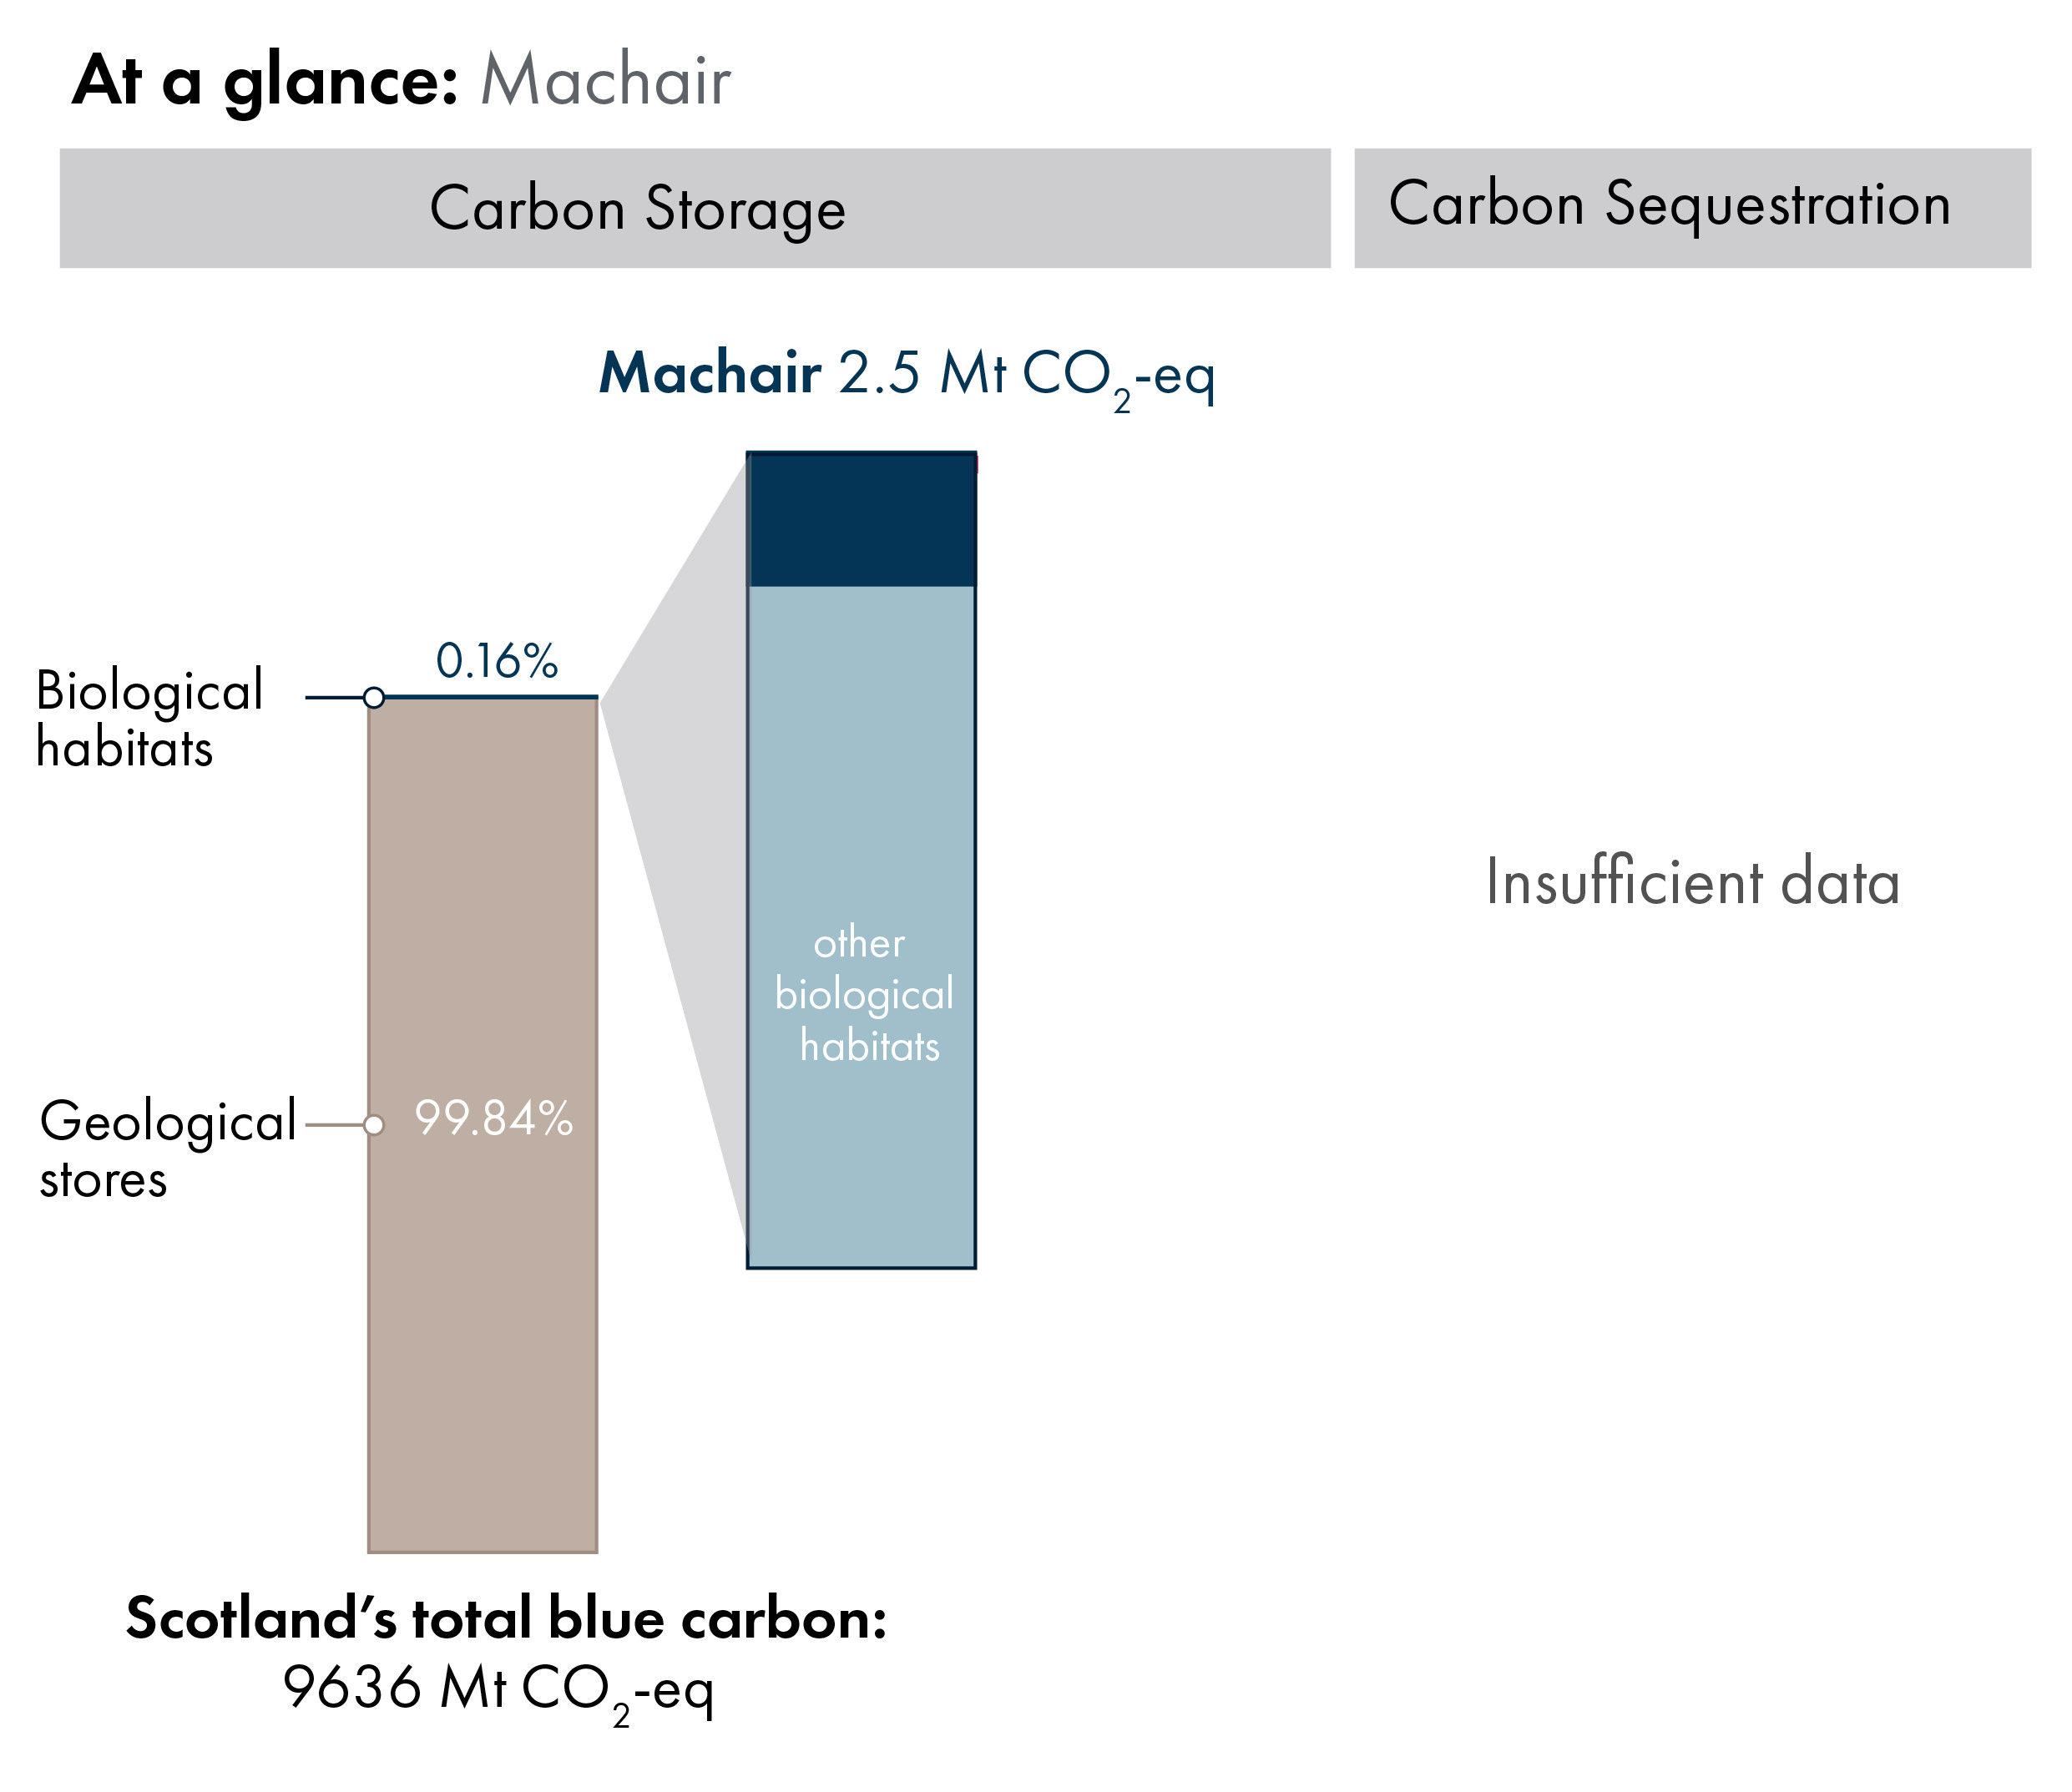 Bar charts showing the proportion of Scotland's blue carbon which is in geological stores (99.84%) versus carbon in biological habitats and species (0.16%). Inset bar chart shows the proportion of carbon in biological habitats which is sand dune carbon storage (2.5 megatonnes of carbon dioxide equivalent).